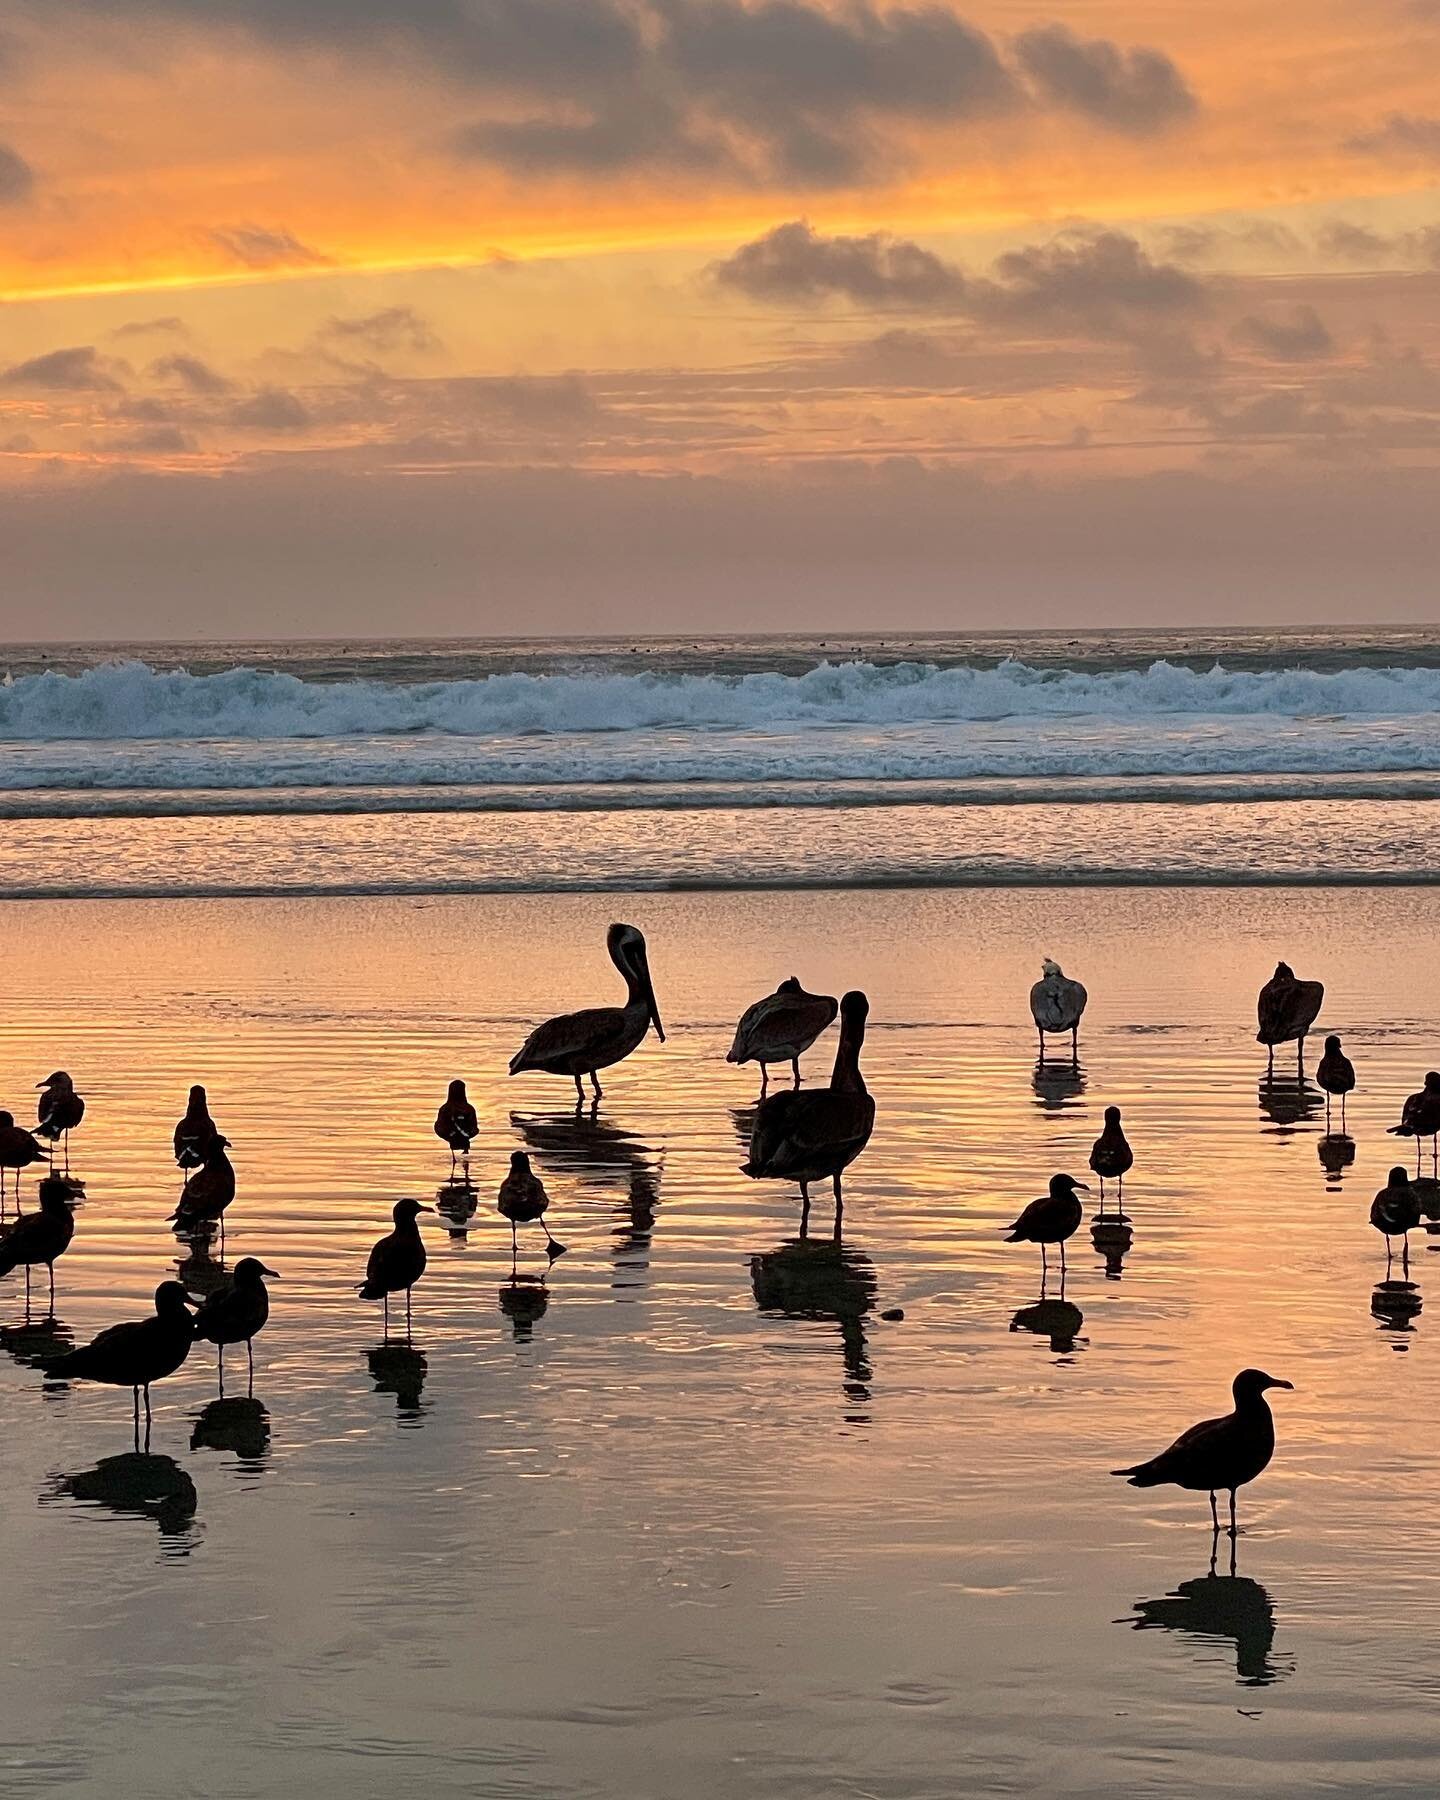 In San Diego, to meet our daughter&rsquo;s future in-laws. And the #pelicans and #gulls , too. #beaches #californiacoast #californiadreaming #beachsunset